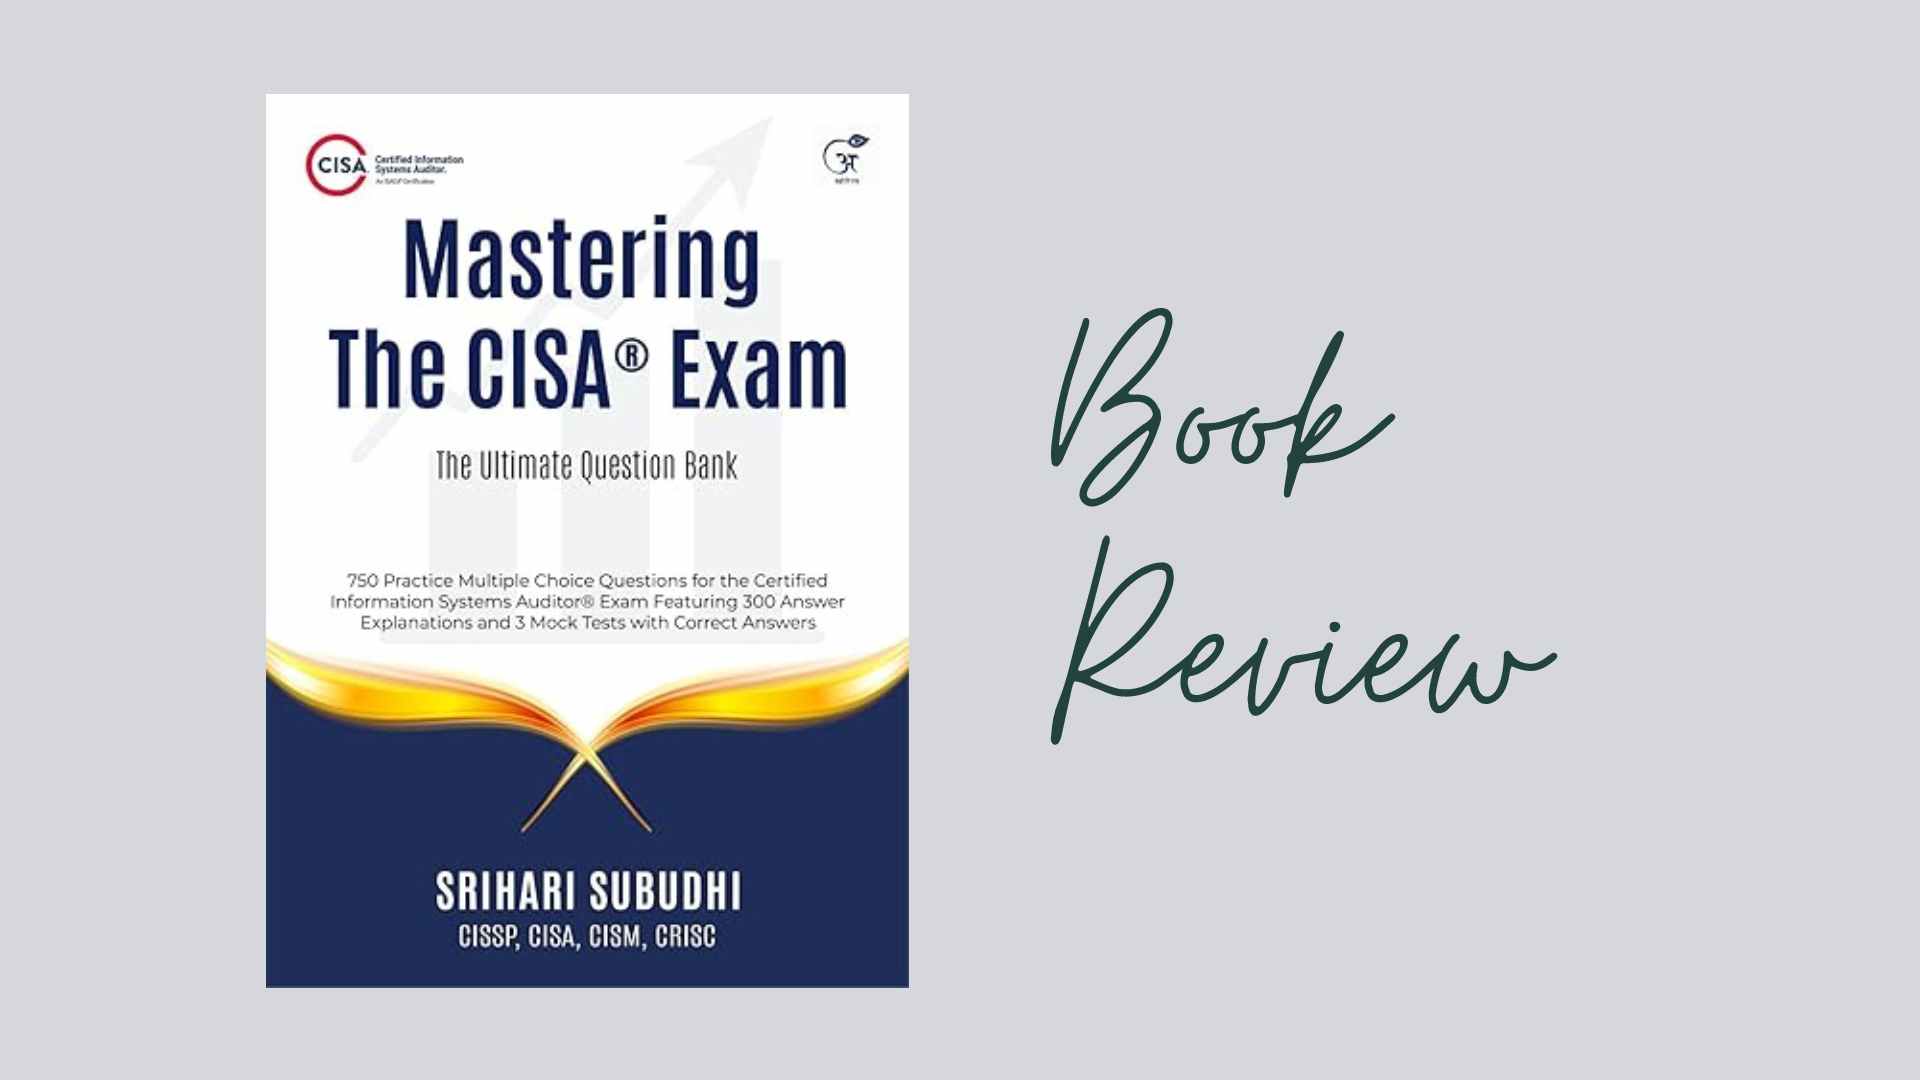 “Mastering The CISA® Exam: The Ultimate Question Bank” by Srihari Subudhi – Review